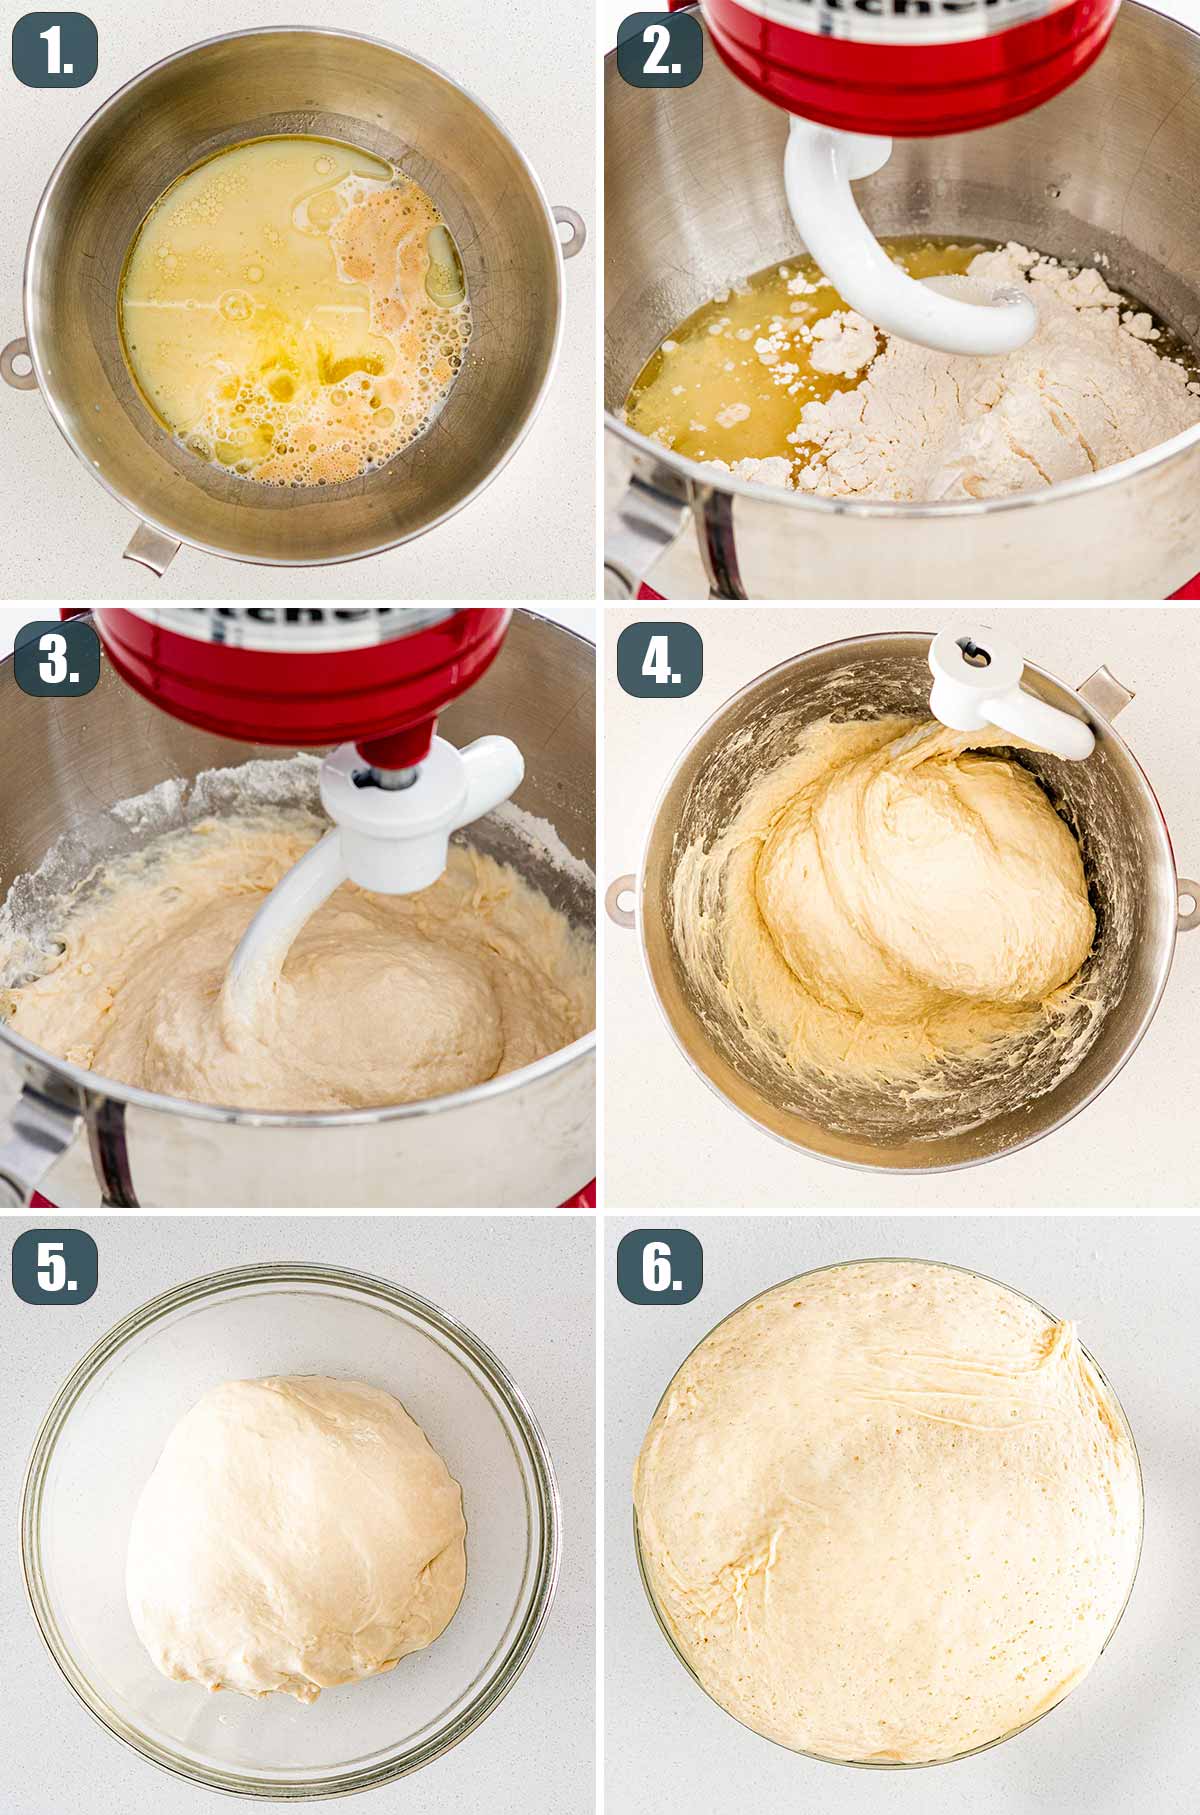 process shots showing how to make the dough for brioche buns.